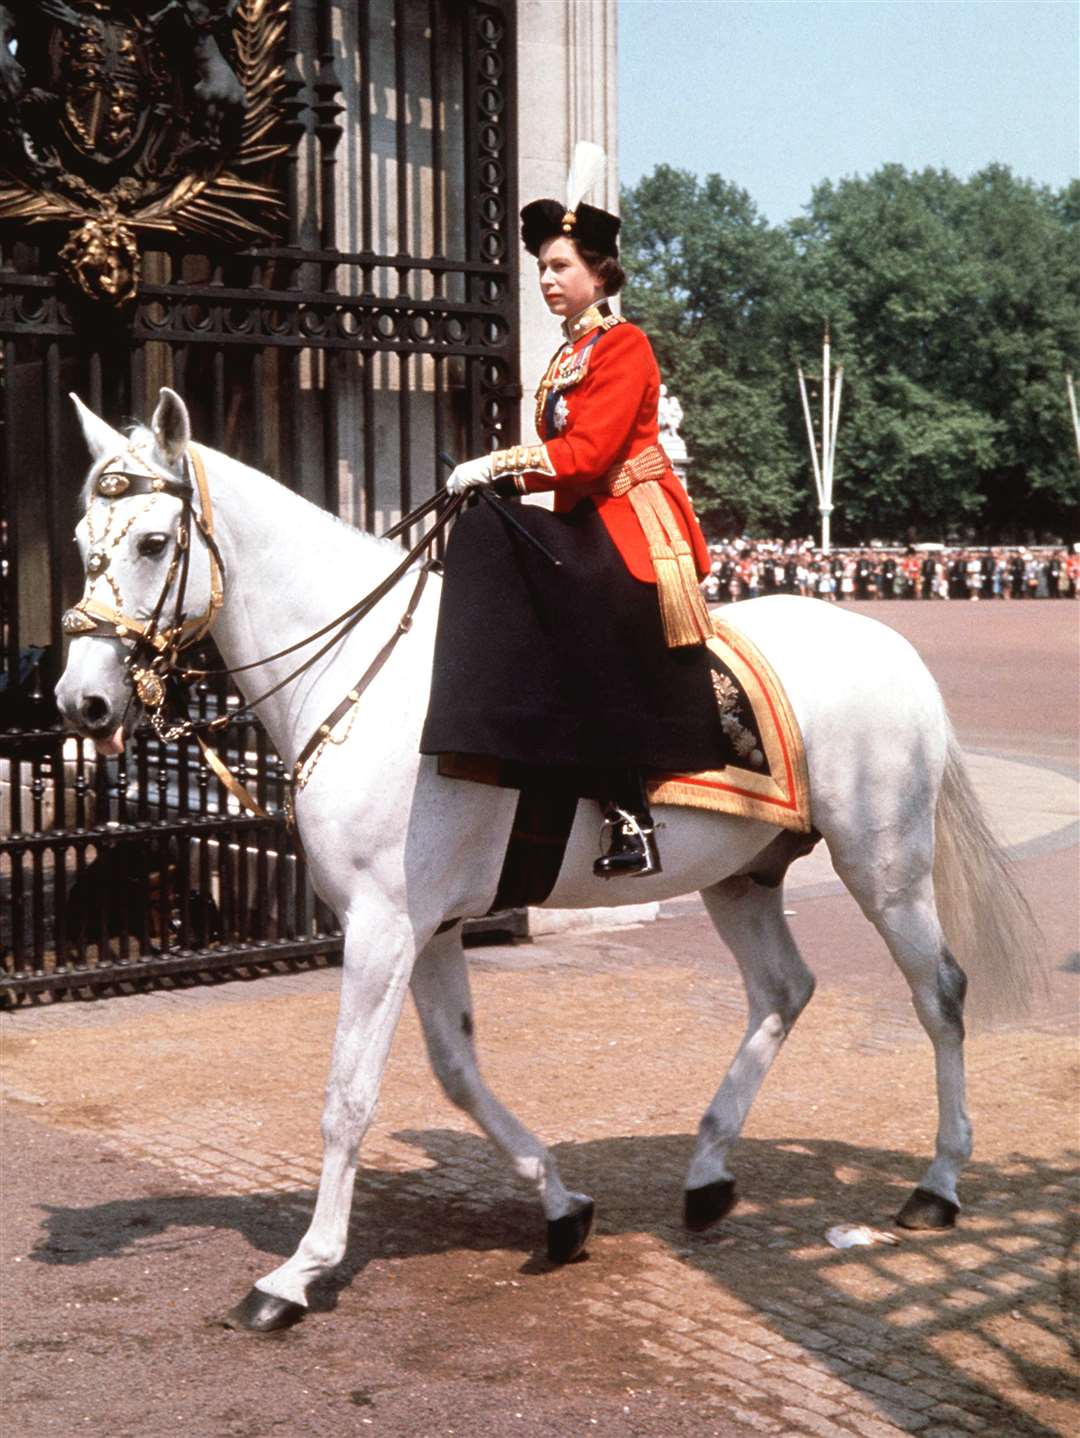 The Queen riding side-saddle after the Trooping the Colour ceremony in 1963 (PA)